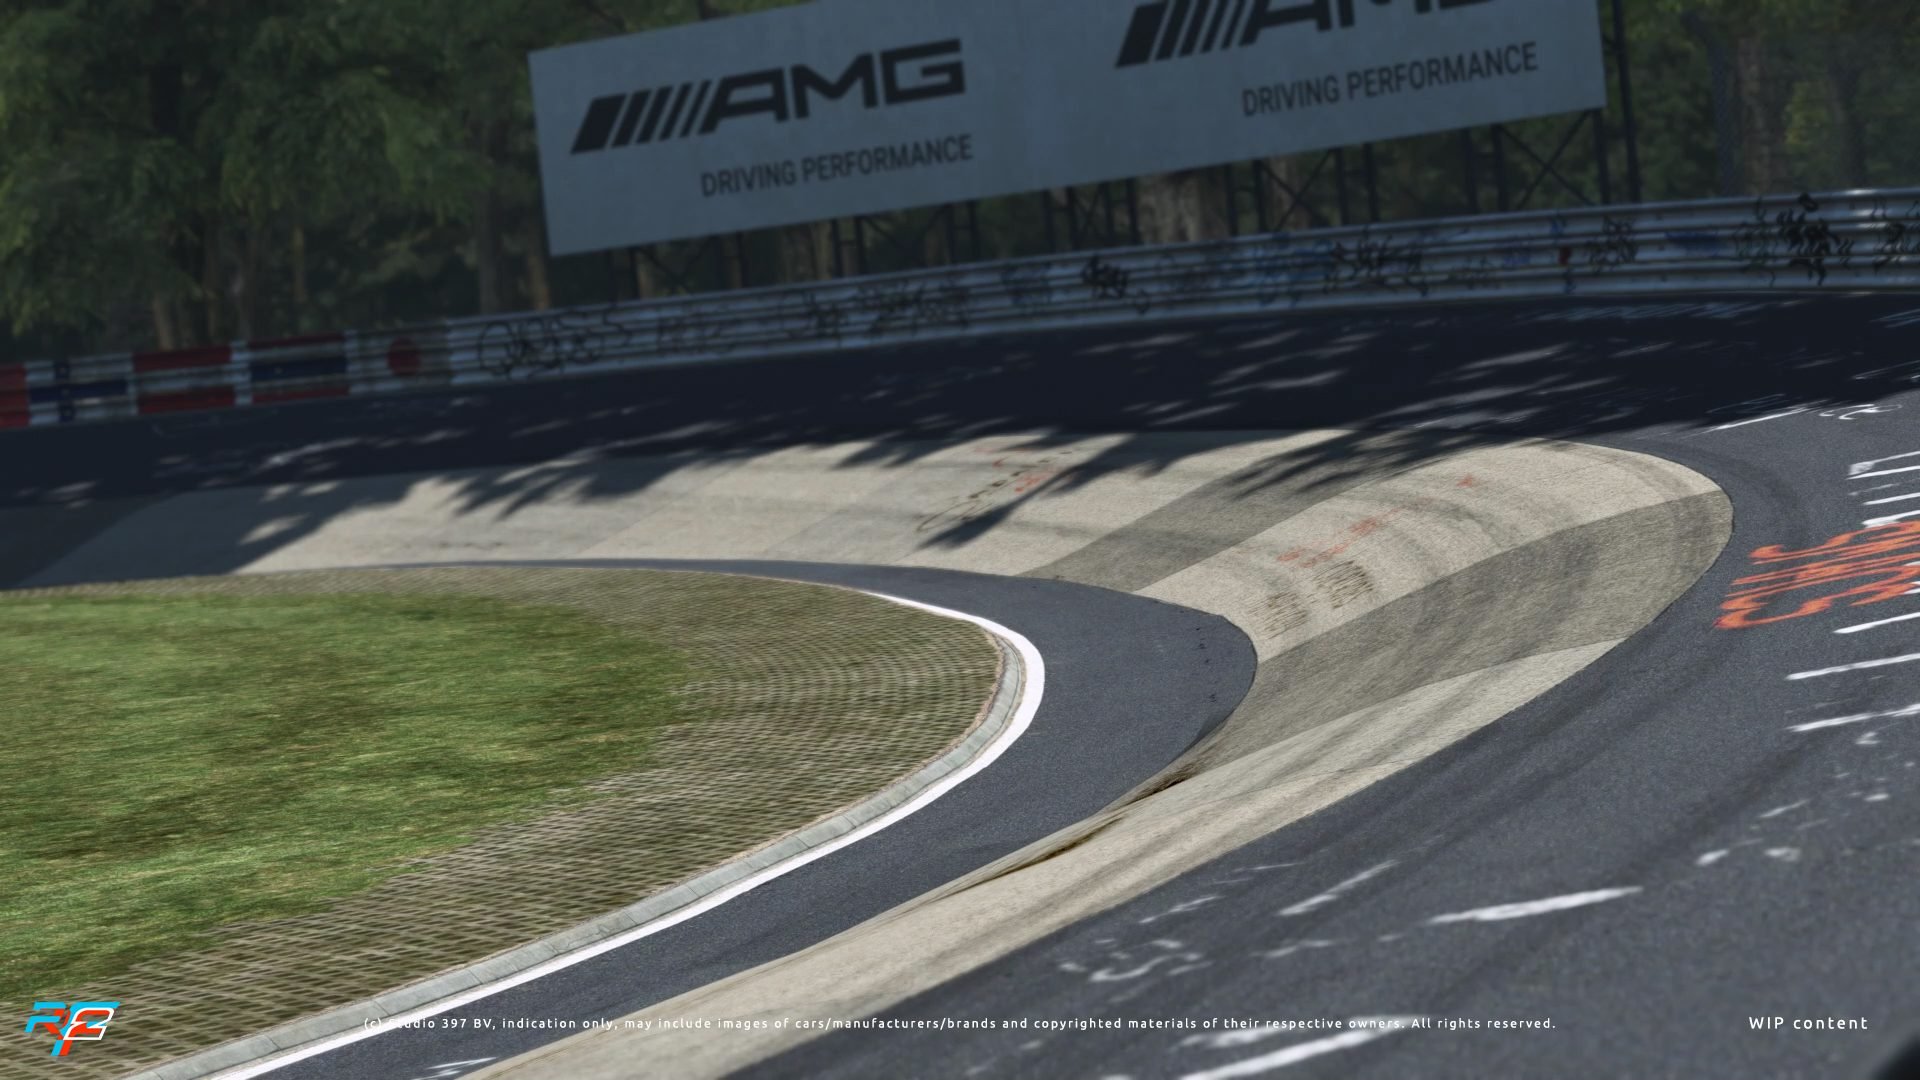 More information about "rFactor 2: al SimRacing Expo presentato il Nürburgring"